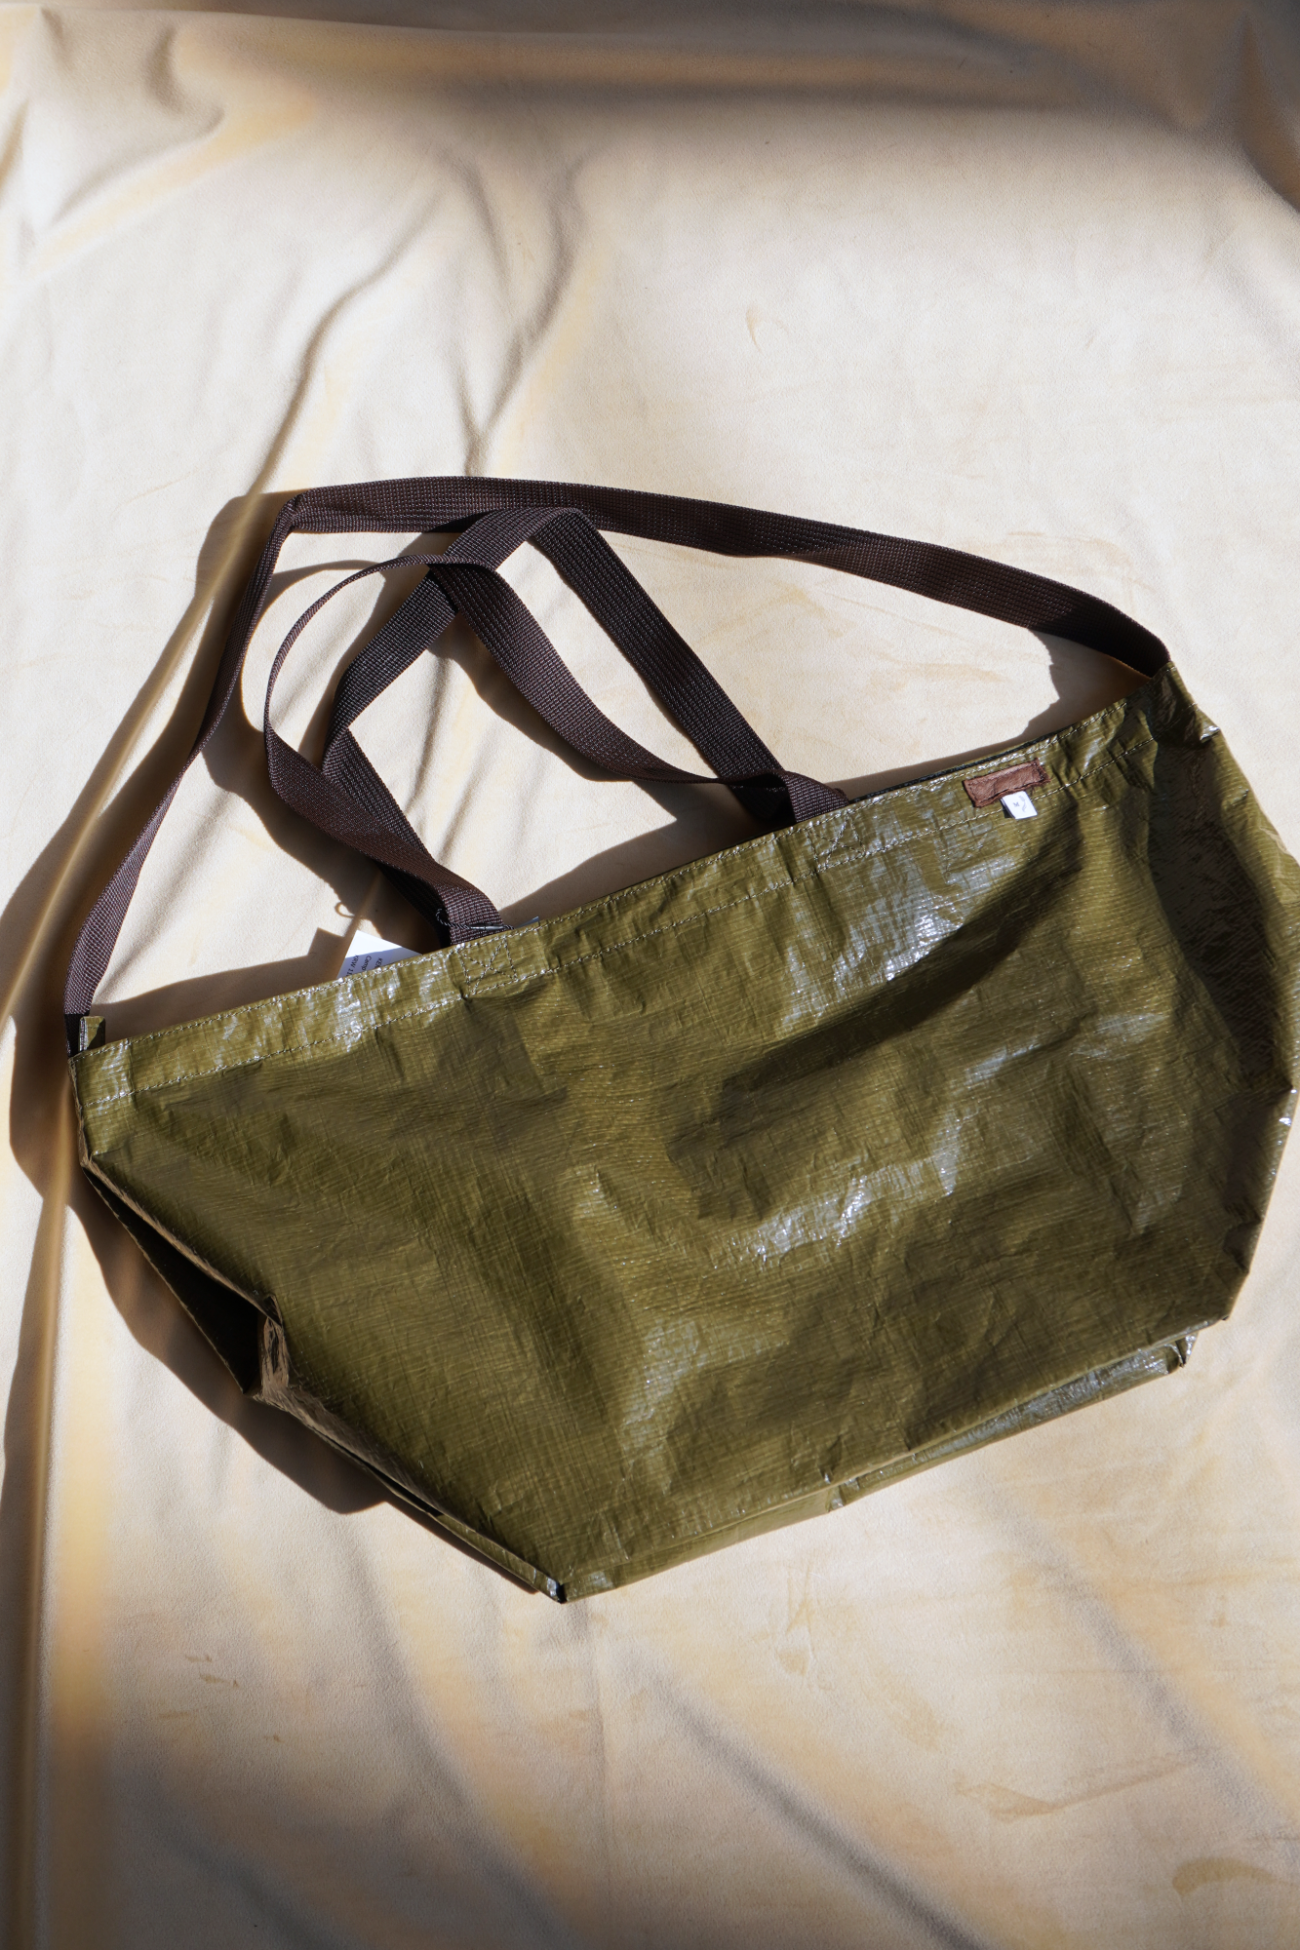 [KENNETH FIELD] Camp Tote (M) - Olive